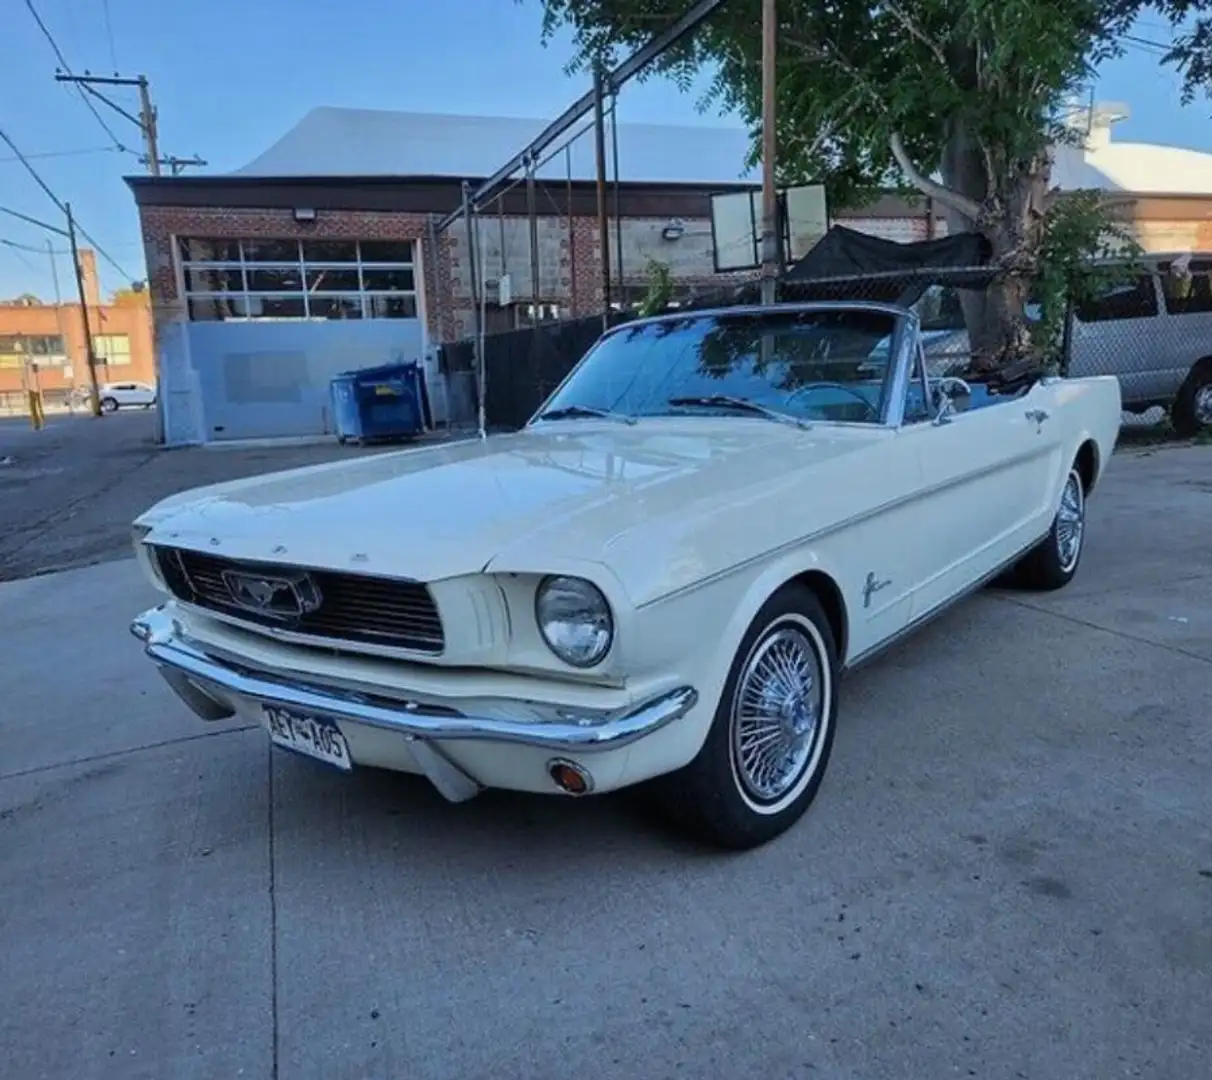 Ford Mustang Convertible - 1